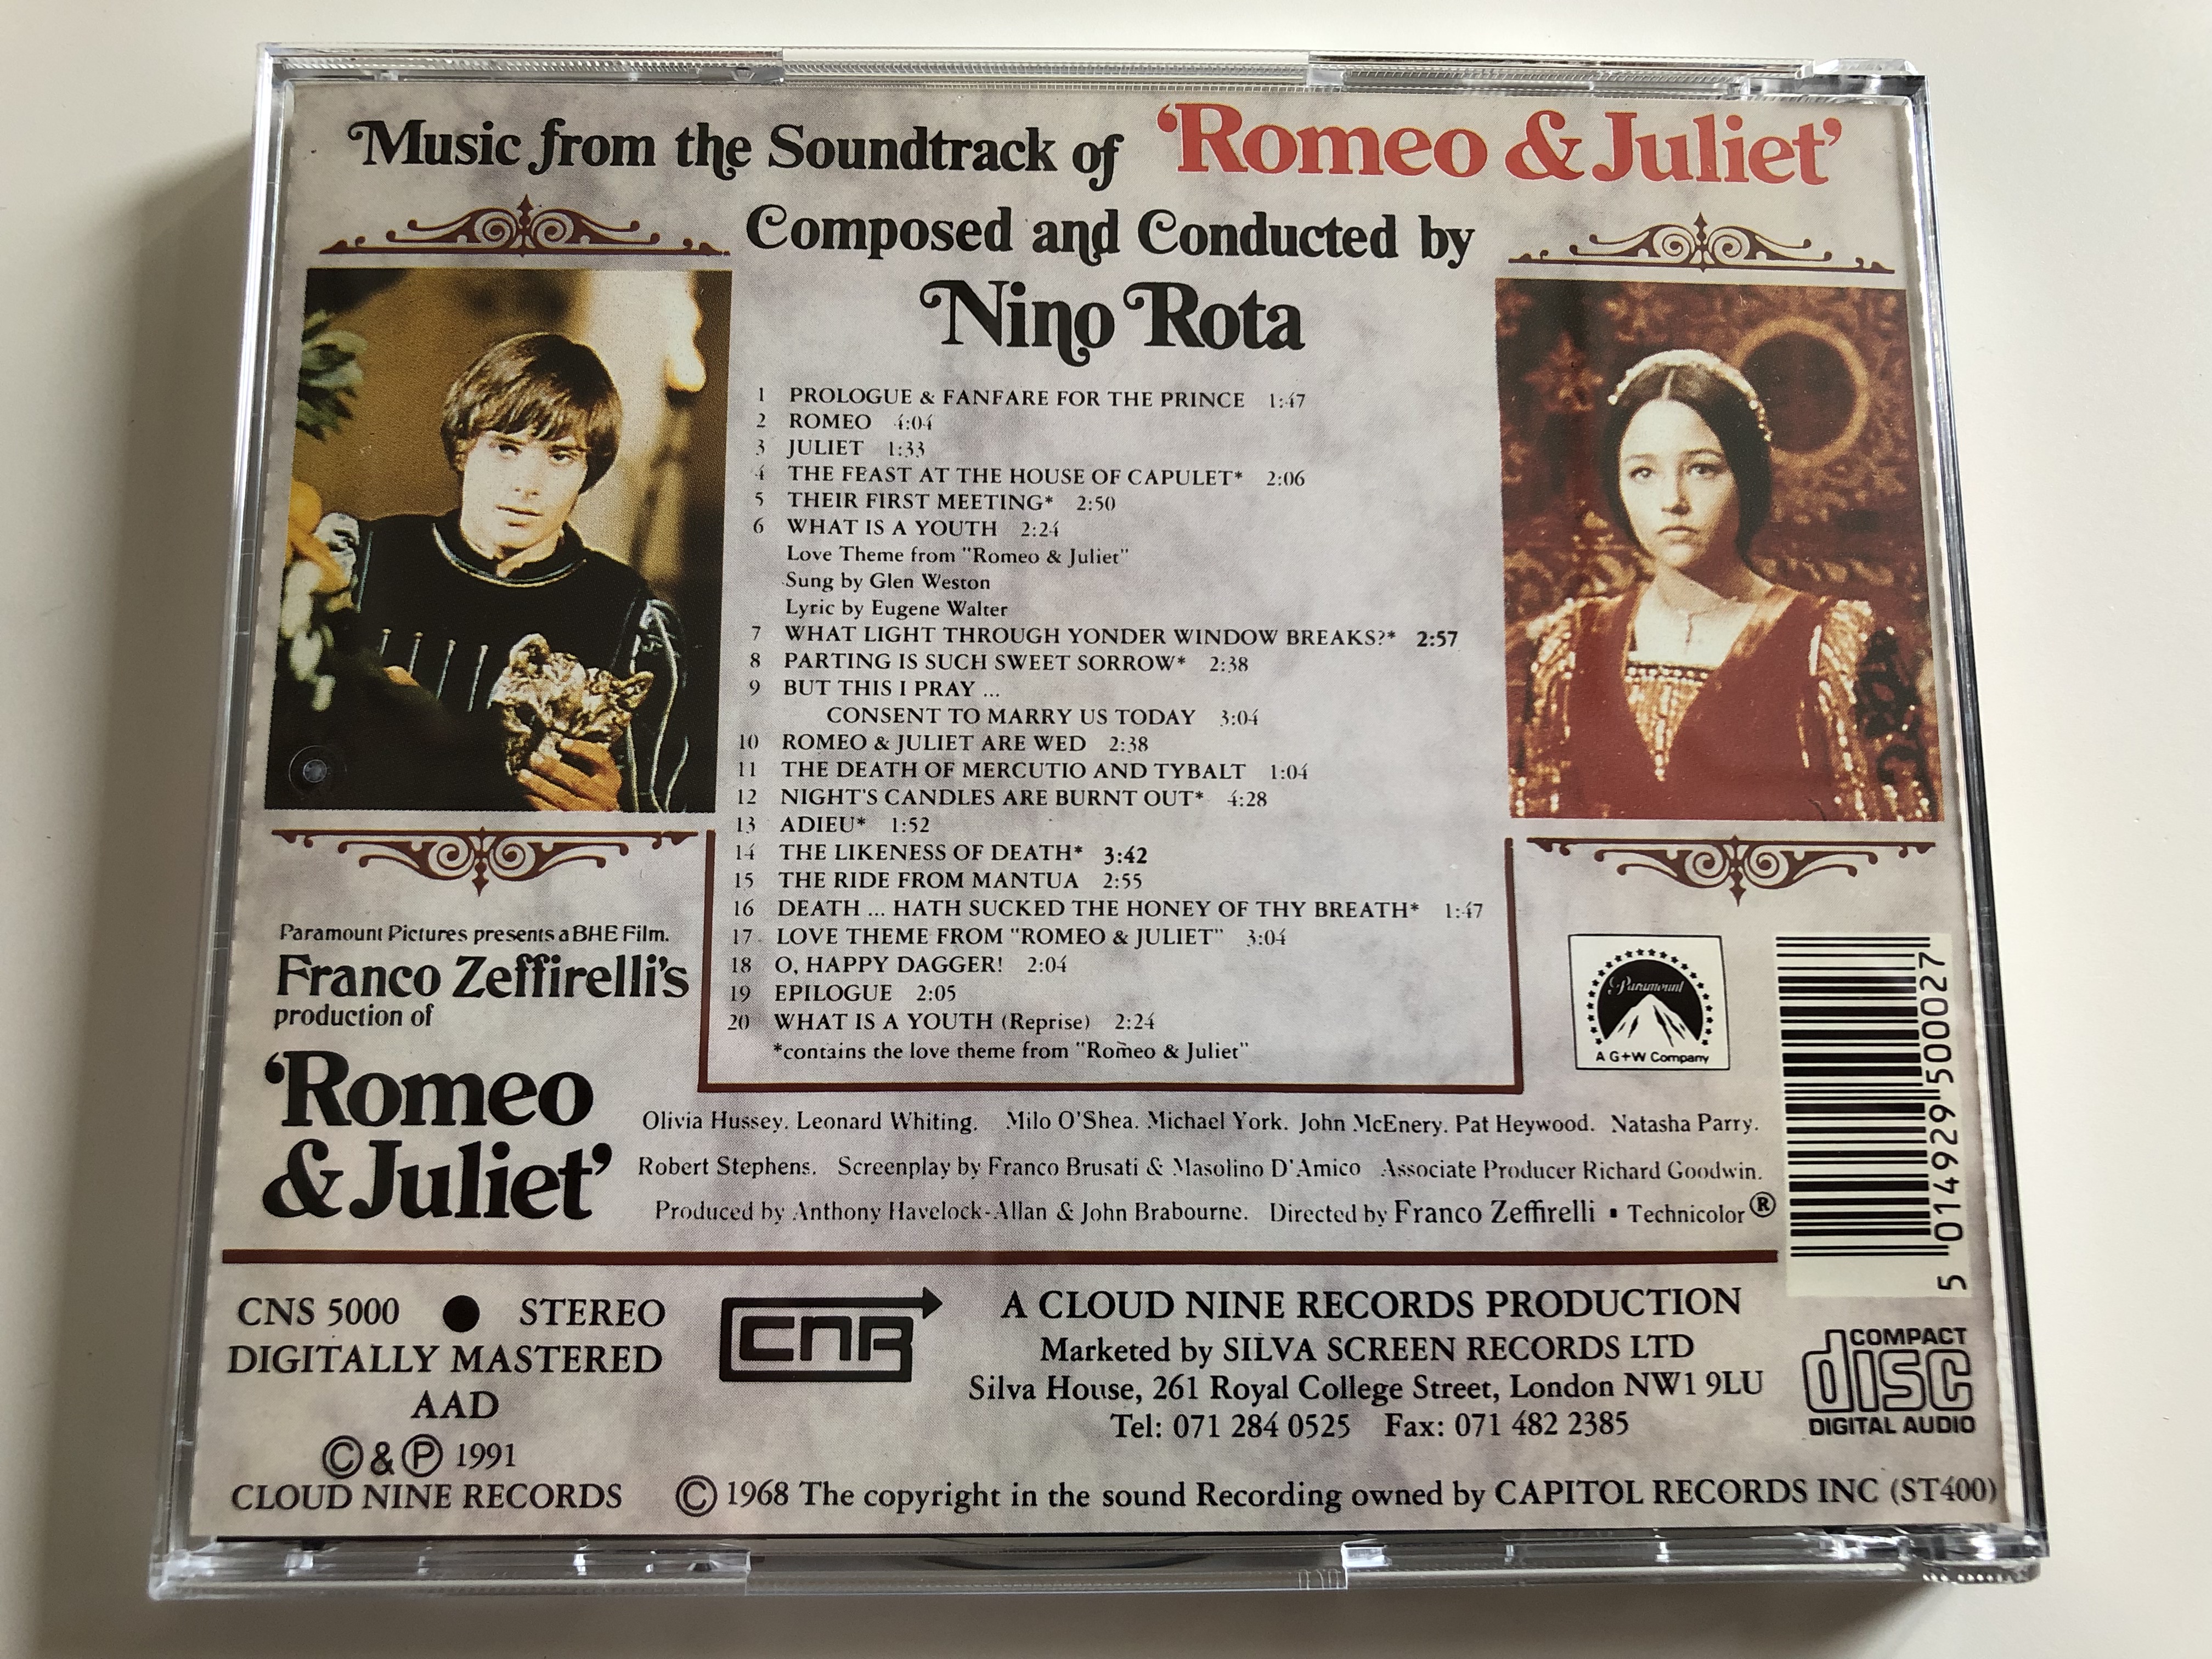 romeo-juliet-soundtrack-music-from-franco-zeffirelli-s-1968-film-audio-cd-1991-composed-and-conducted-by-nino-rota-cloud-nine-records-7-.jpg